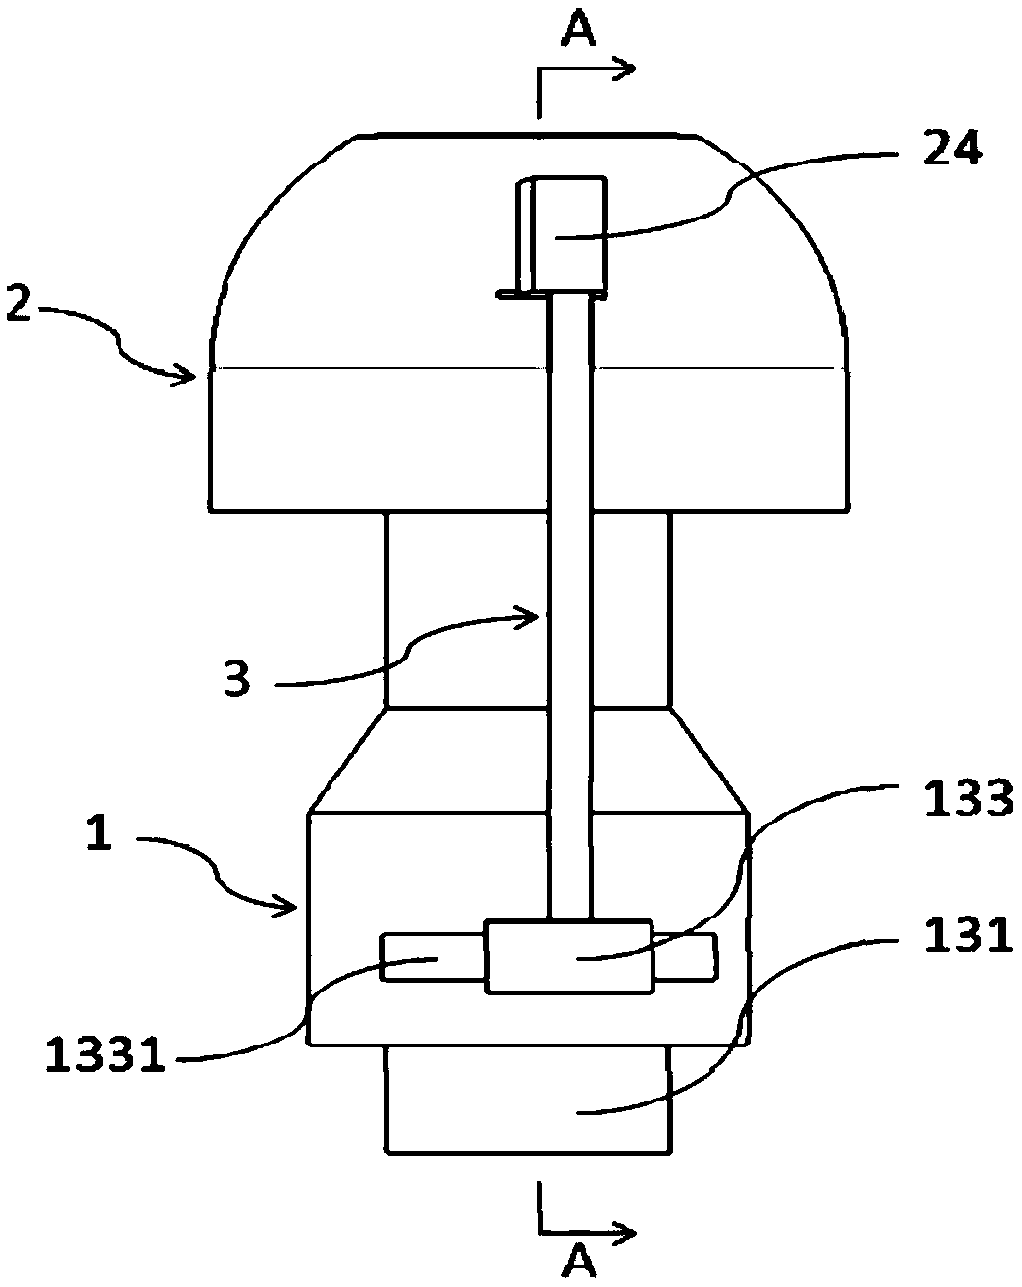 Air Pre-filter and Air Filtration System for Engine